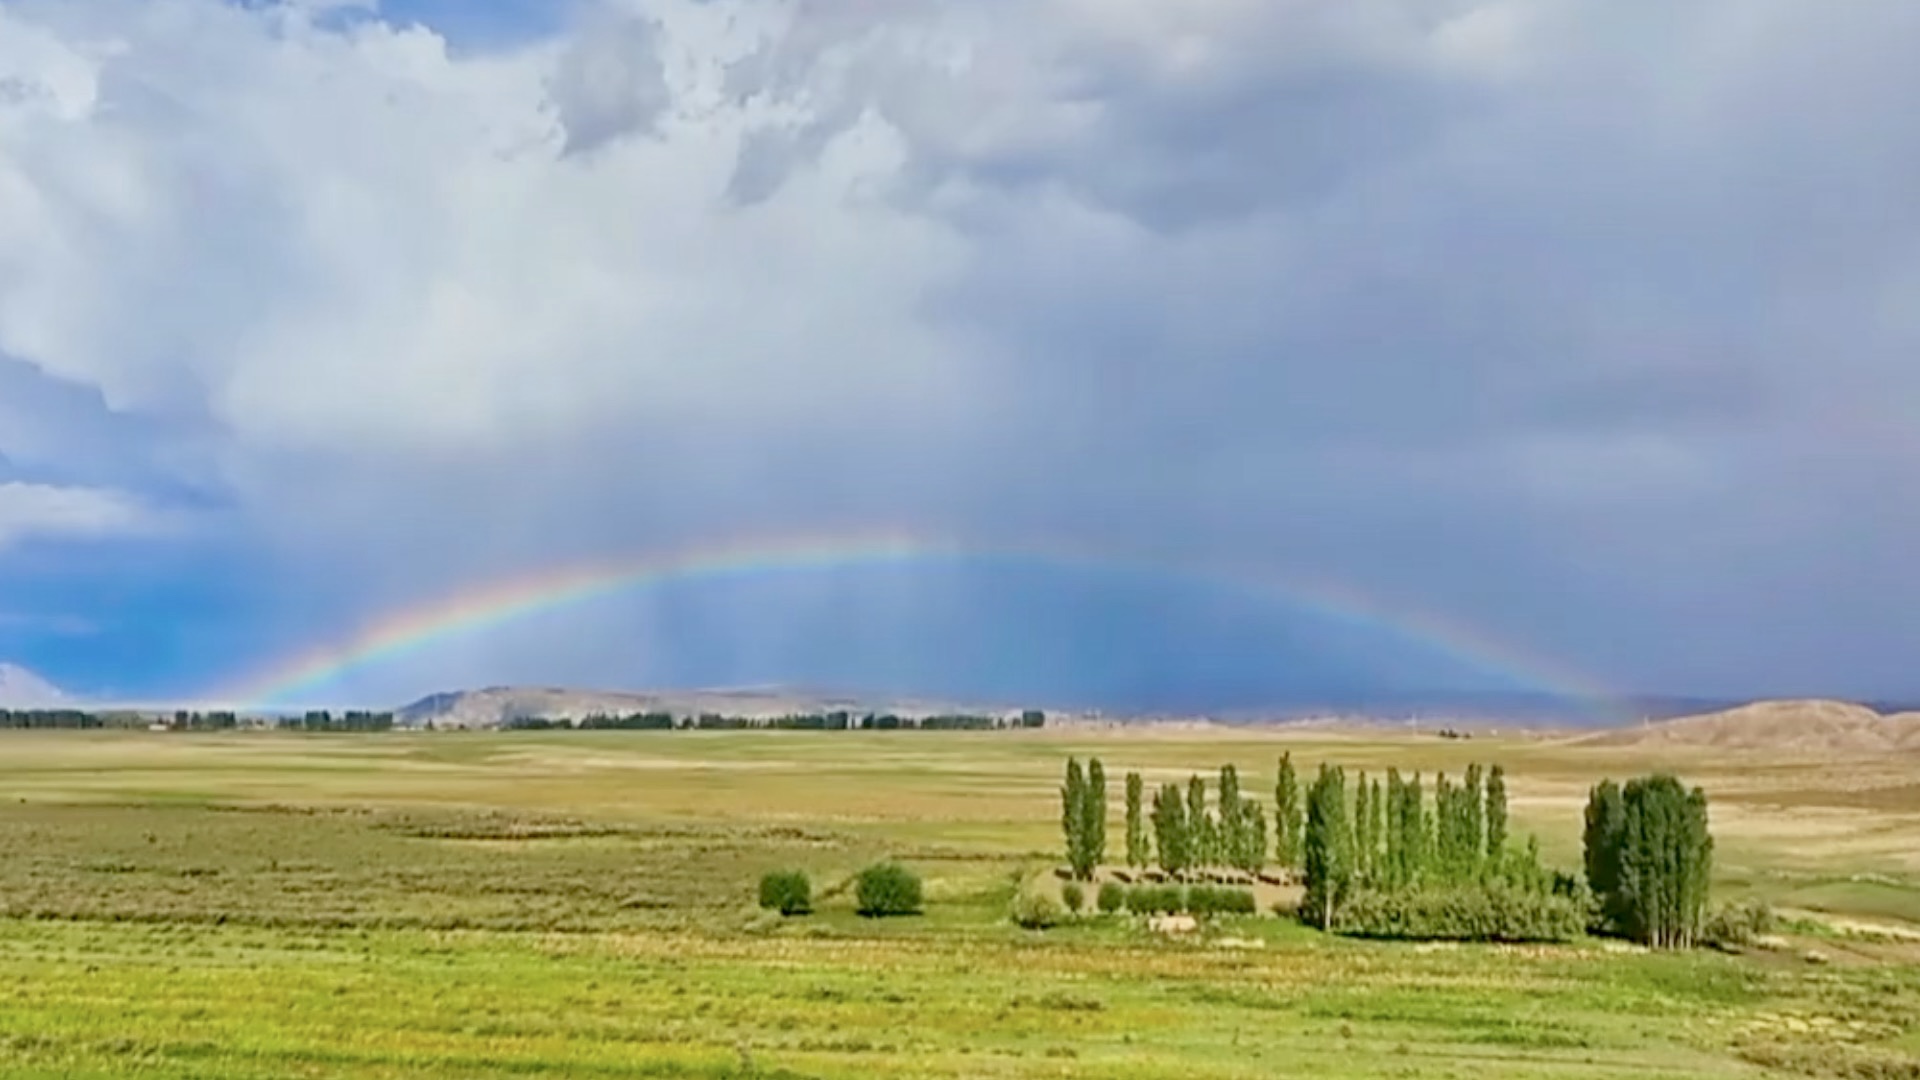 Stunning rainbow reigns over mountains and fields in China's Xinjiang